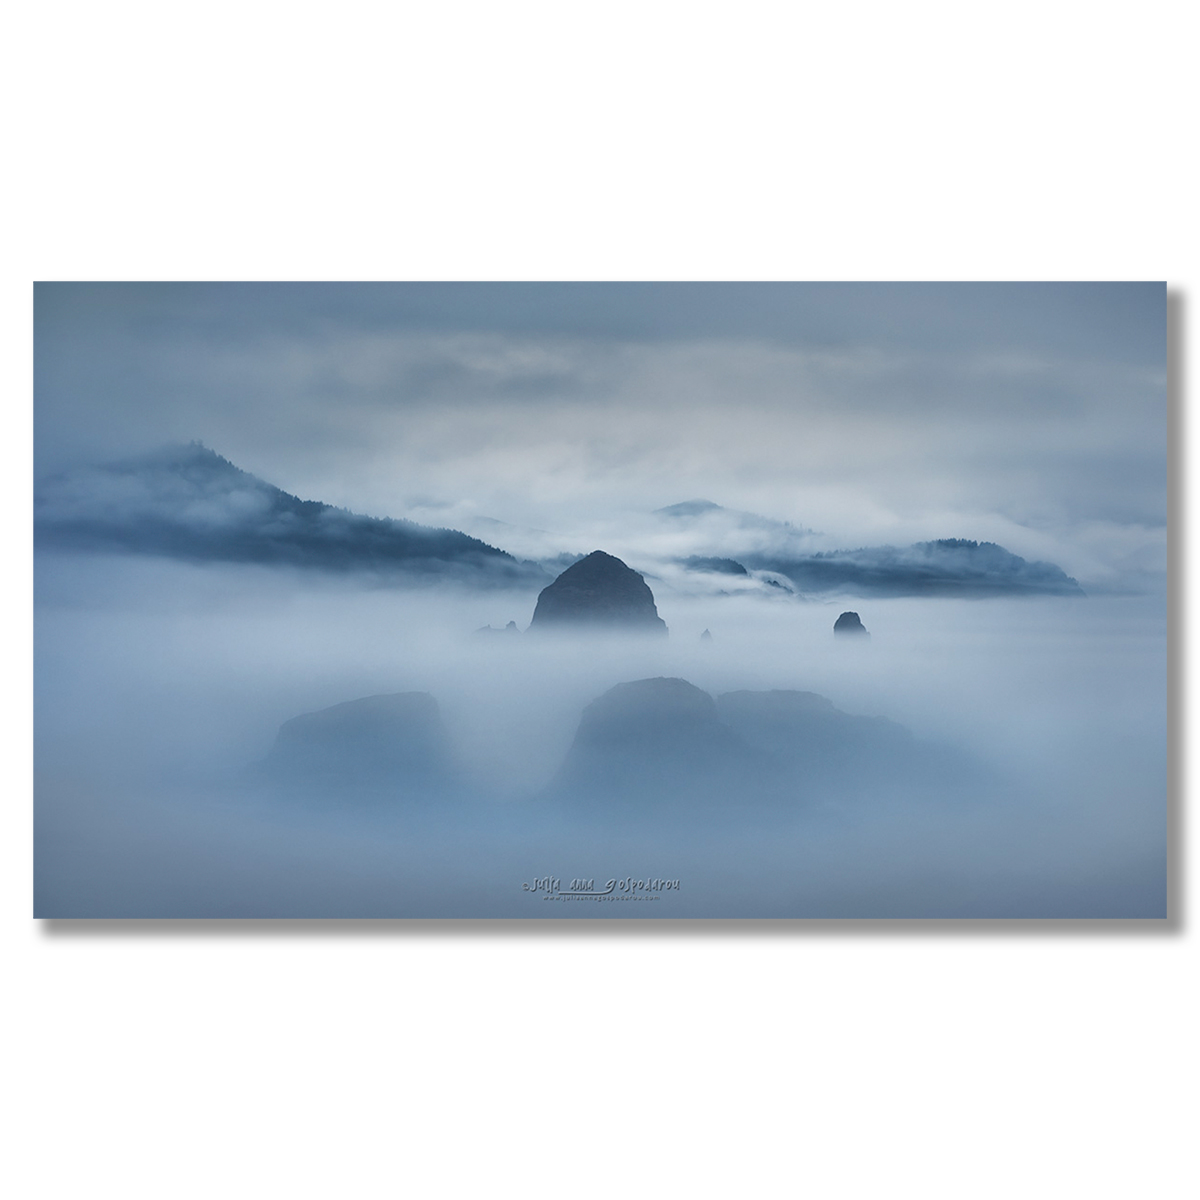 Unveiled II – Oregon Coast
One of my favorite moments on the Oregon Coast. Looking forward to the Japan workshop. If you want to join us, this is the last day for the Cyber Week discount.
juliaannagospodarou.com/store/ 

#fineartphotography #landscapephotography #cybermonday #cyberweek